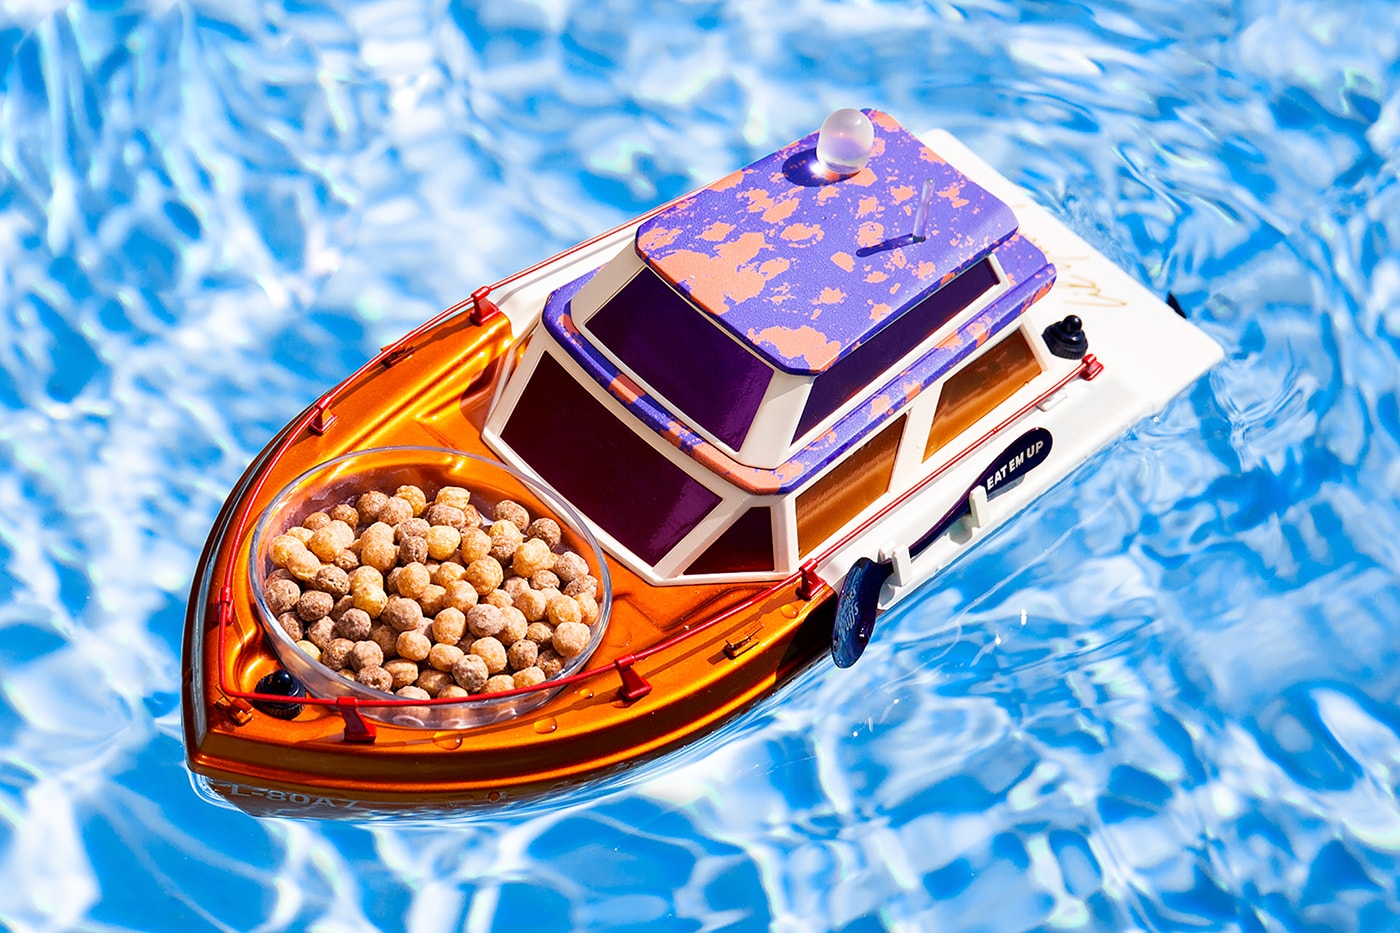 Lil Yachty and REESE’S PUFFS dropping Lil Yacht Boat Cereal Collaboration cereal reese's